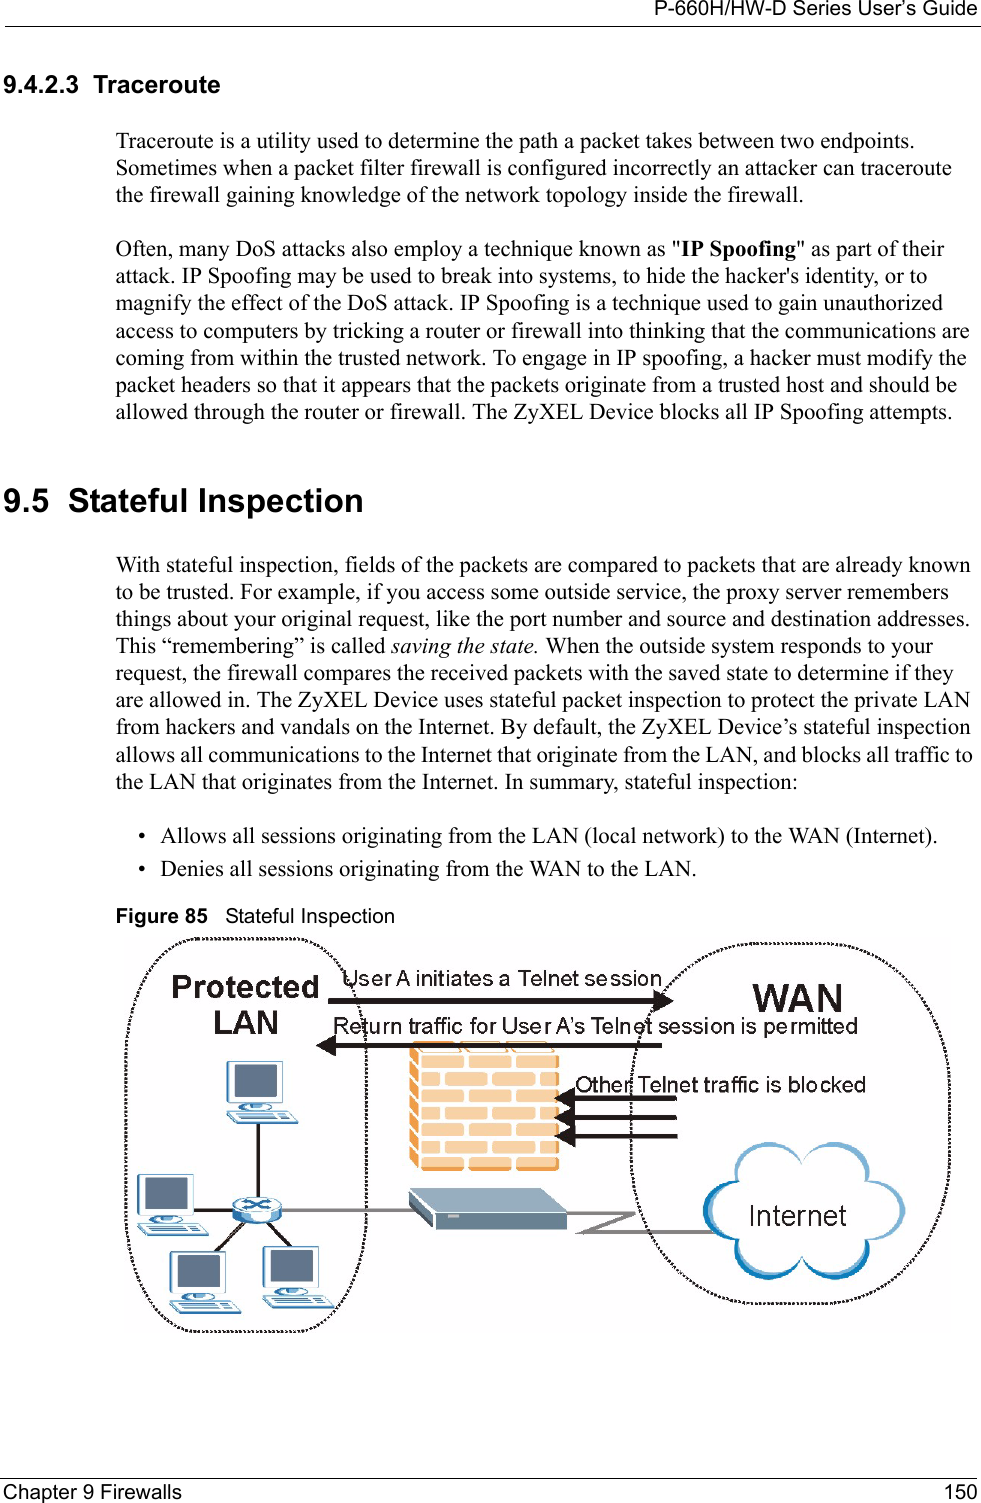 P-660H/HW-D Series User’s GuideChapter 9 Firewalls 1509.4.2.3  TracerouteTraceroute is a utility used to determine the path a packet takes between two endpoints. Sometimes when a packet filter firewall is configured incorrectly an attacker can traceroute the firewall gaining knowledge of the network topology inside the firewall.Often, many DoS attacks also employ a technique known as &quot;IP Spoofing&quot; as part of their attack. IP Spoofing may be used to break into systems, to hide the hacker&apos;s identity, or to magnify the effect of the DoS attack. IP Spoofing is a technique used to gain unauthorized access to computers by tricking a router or firewall into thinking that the communications are coming from within the trusted network. To engage in IP spoofing, a hacker must modify the packet headers so that it appears that the packets originate from a trusted host and should be allowed through the router or firewall. The ZyXEL Device blocks all IP Spoofing attempts.9.5  Stateful InspectionWith stateful inspection, fields of the packets are compared to packets that are already known to be trusted. For example, if you access some outside service, the proxy server remembers things about your original request, like the port number and source and destination addresses. This “remembering” is called saving the state. When the outside system responds to your request, the firewall compares the received packets with the saved state to determine if they are allowed in. The ZyXEL Device uses stateful packet inspection to protect the private LAN from hackers and vandals on the Internet. By default, the ZyXEL Device’s stateful inspection allows all communications to the Internet that originate from the LAN, and blocks all traffic to the LAN that originates from the Internet. In summary, stateful inspection: • Allows all sessions originating from the LAN (local network) to the WAN (Internet).• Denies all sessions originating from the WAN to the LAN.Figure 85   Stateful Inspection